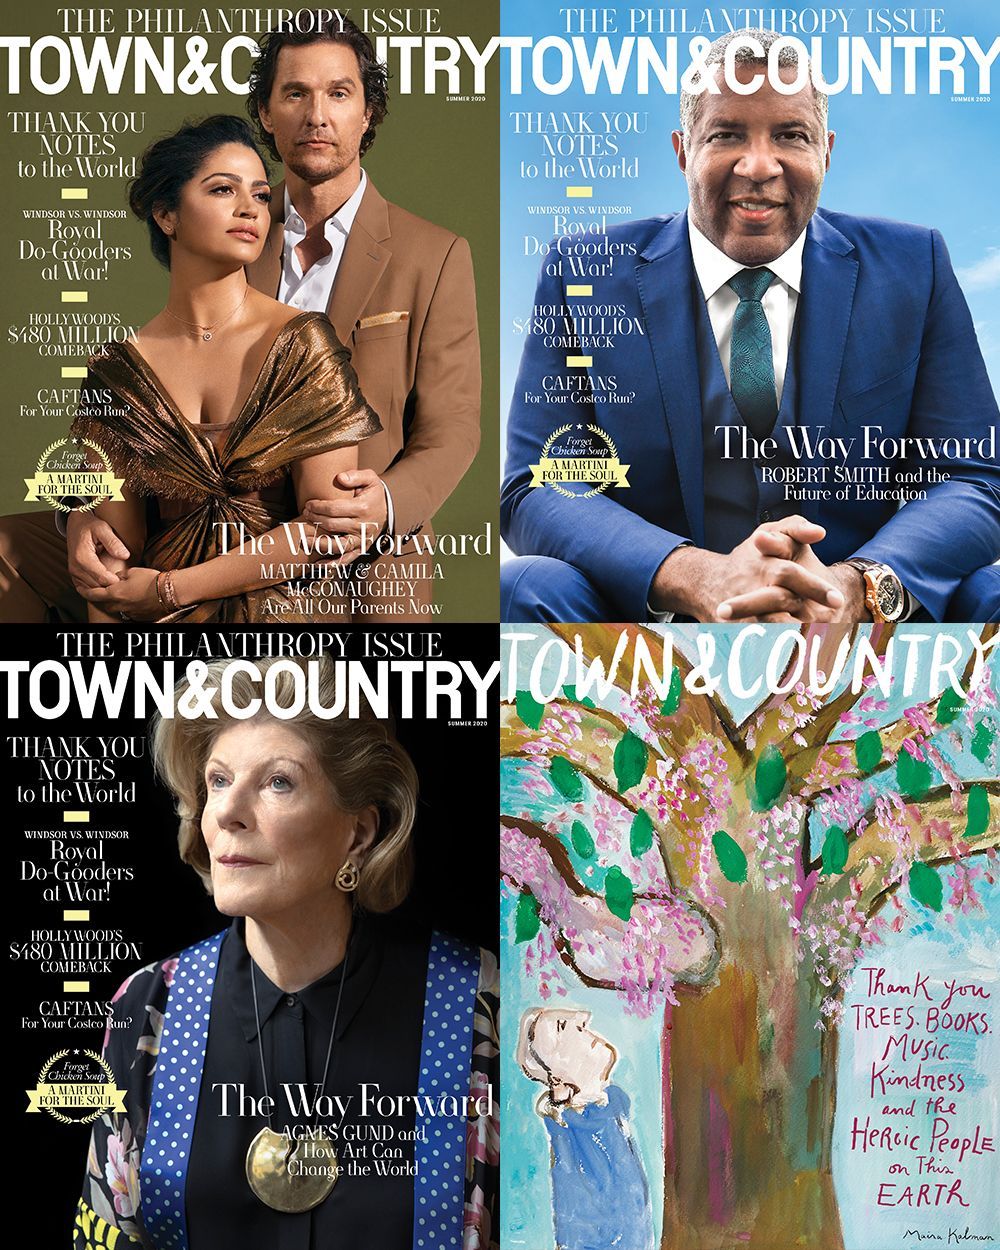 SUBSCRIBE NOW TO TOWN & COUNTRY